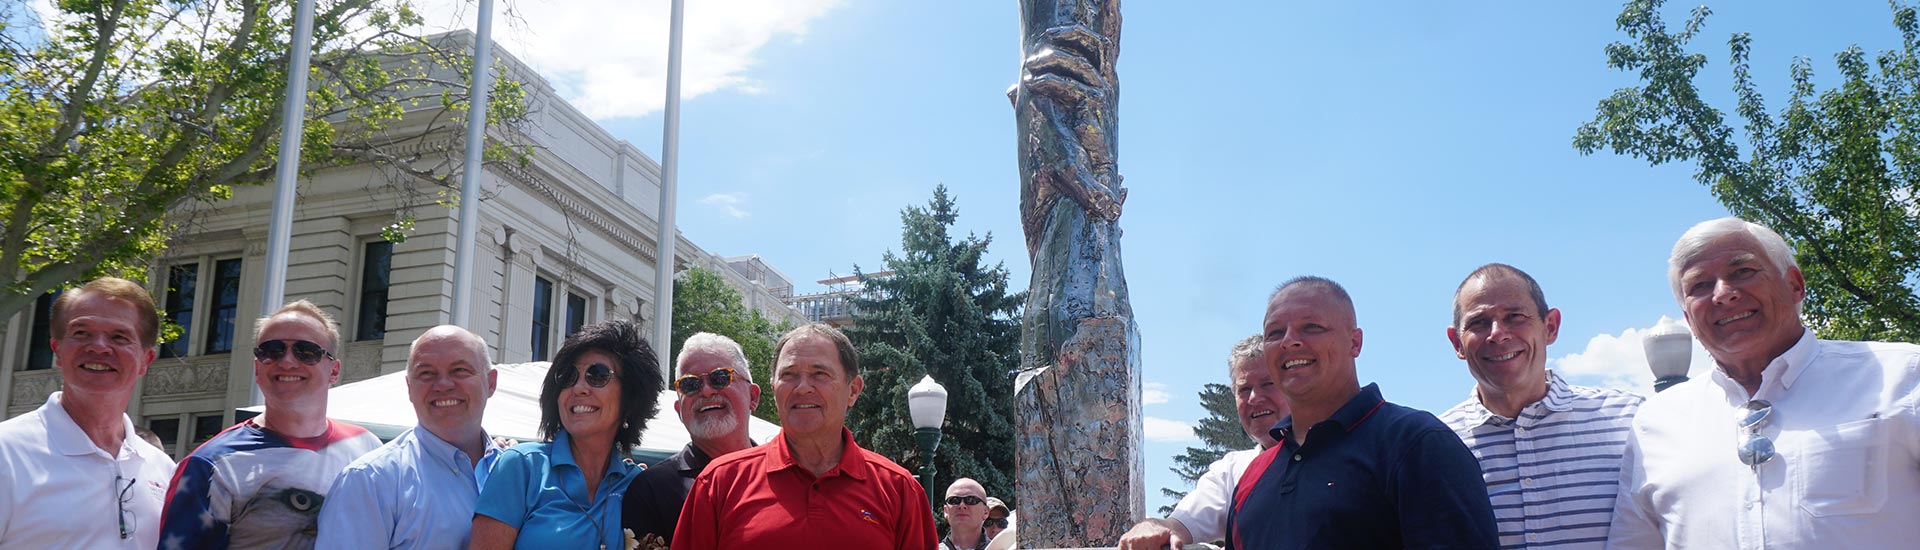 Statue of Responsibility Dedicated in Provo, UT on July 4th, 2016